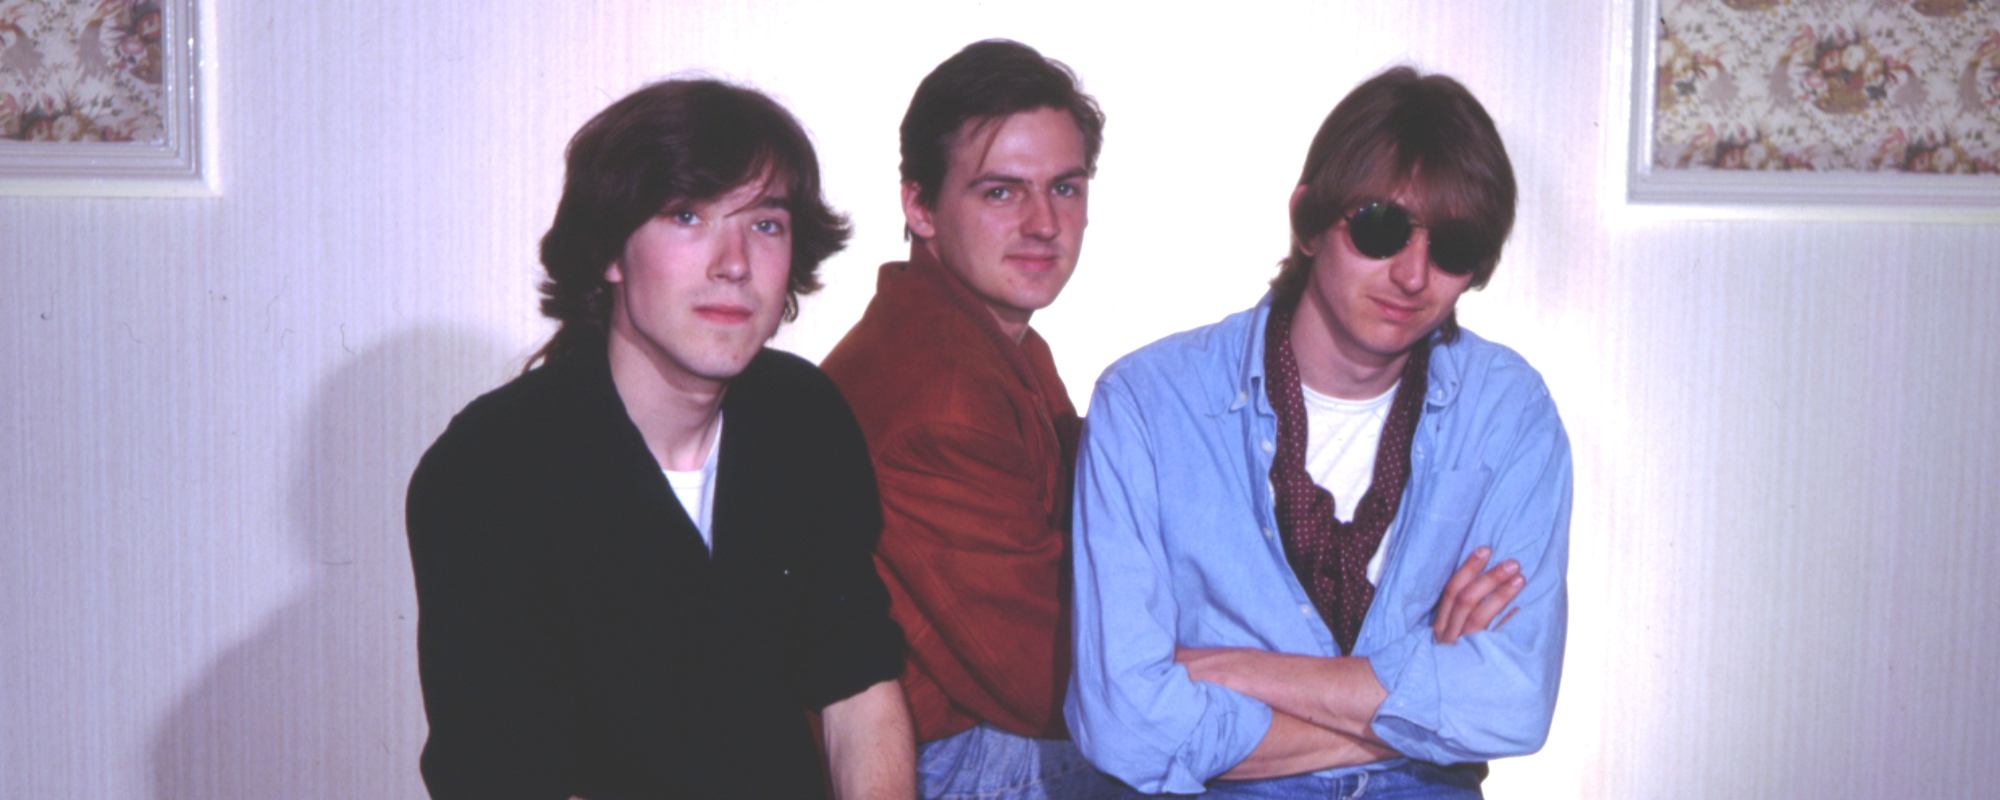 The Meaning Behind Talk Talk’s “Such a Shame” and Why Mark Hollis Said No Dice